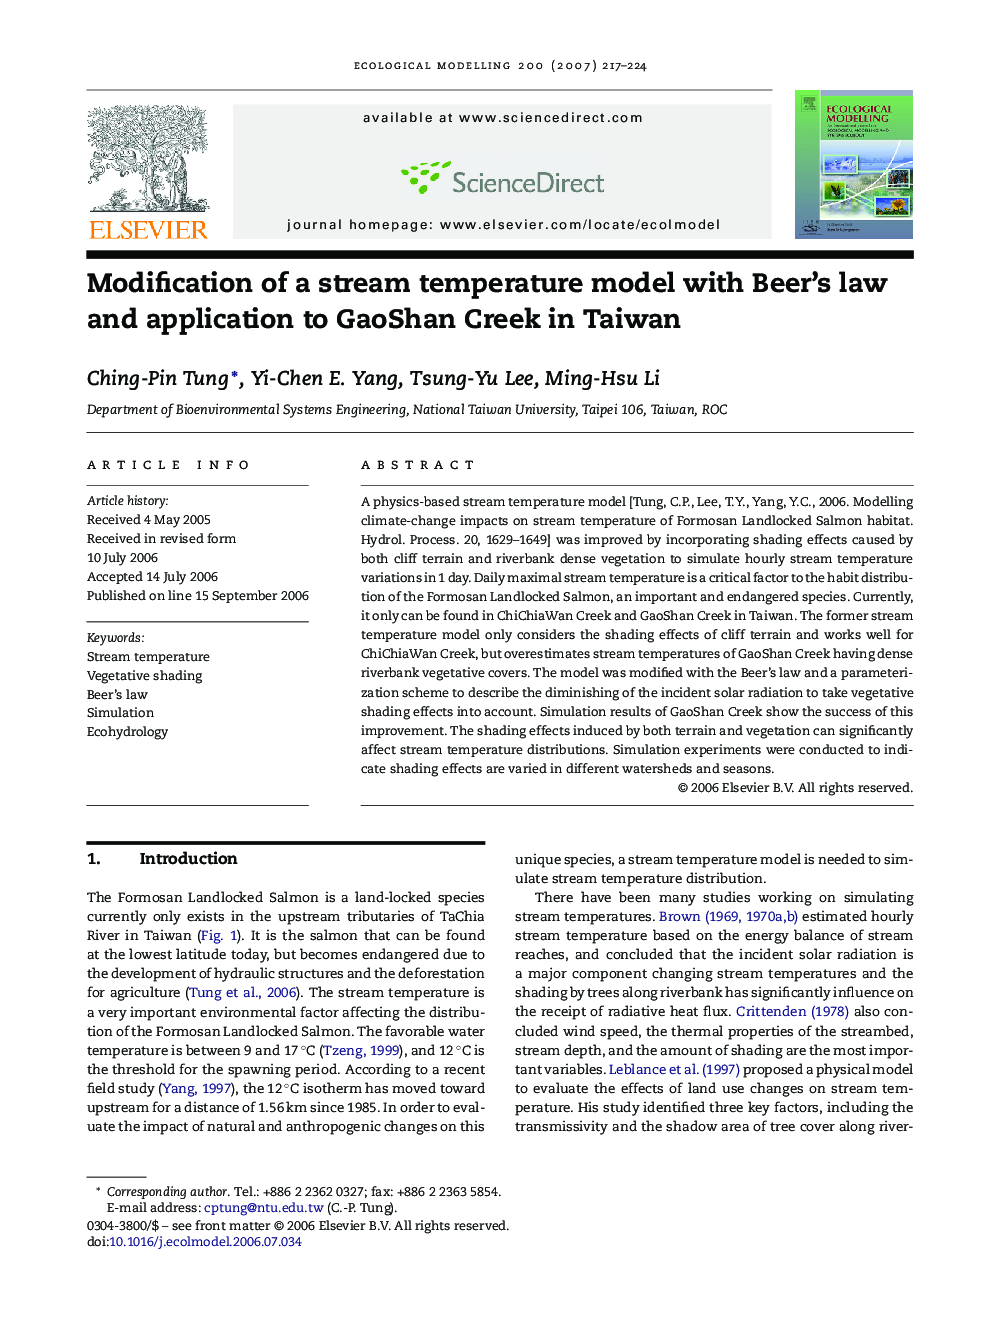 Modification of a stream temperature model with Beer's law and application to GaoShan Creek in Taiwan